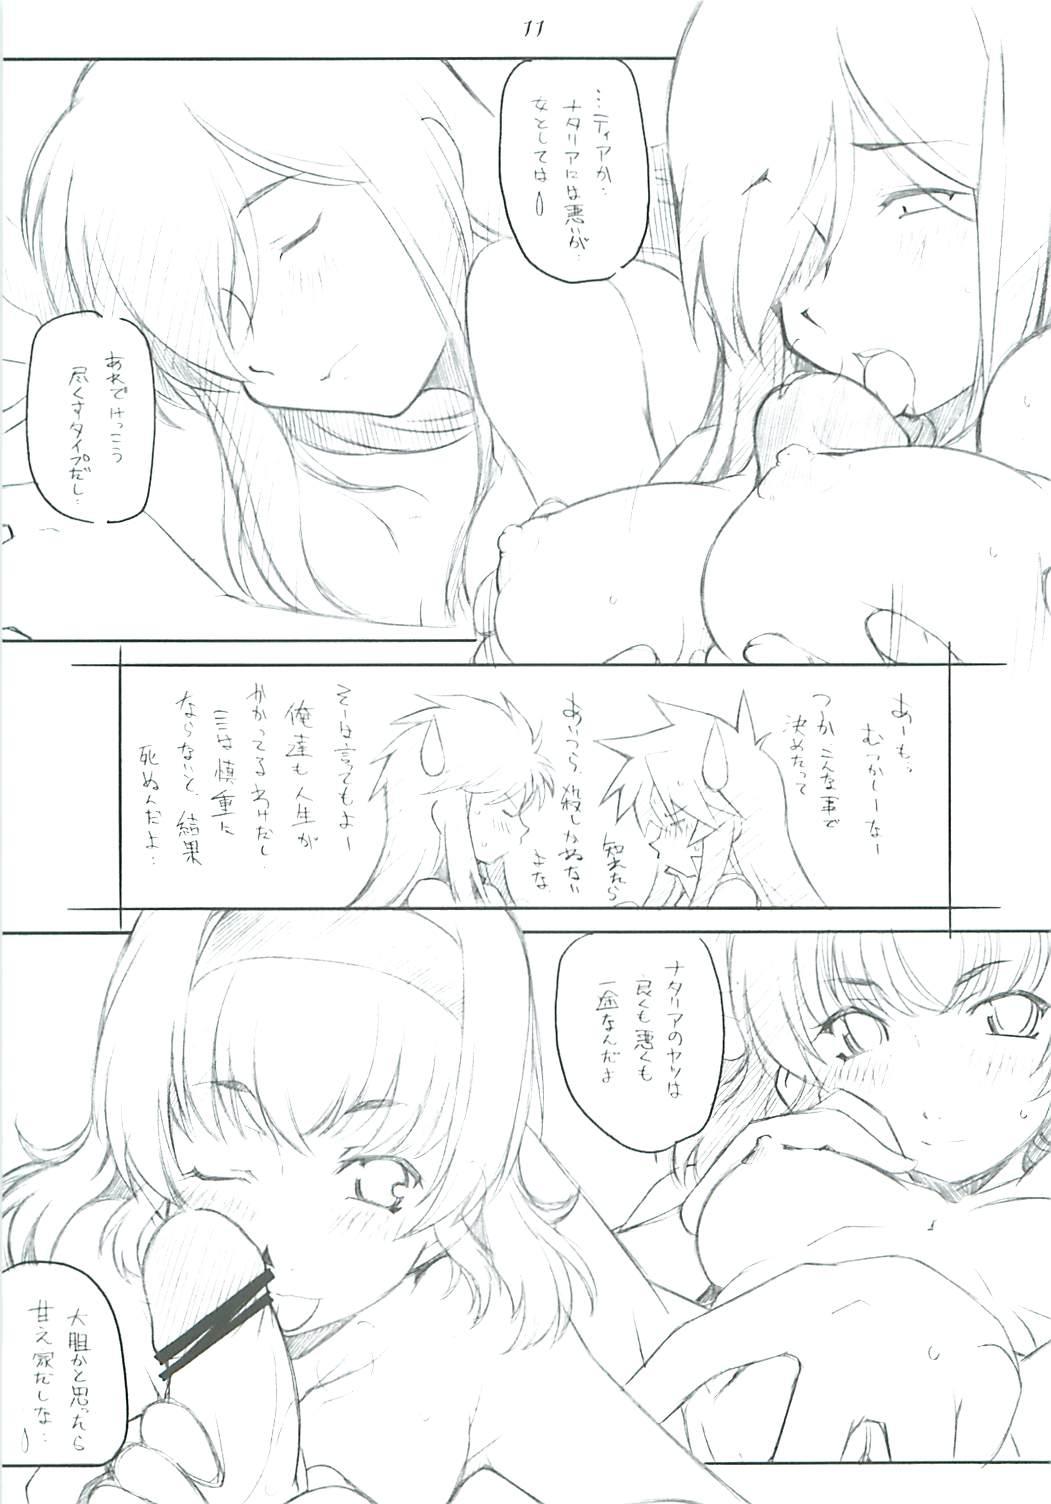 Girls abyss 2 - Tales of the abyss Soapy Massage - Page 11